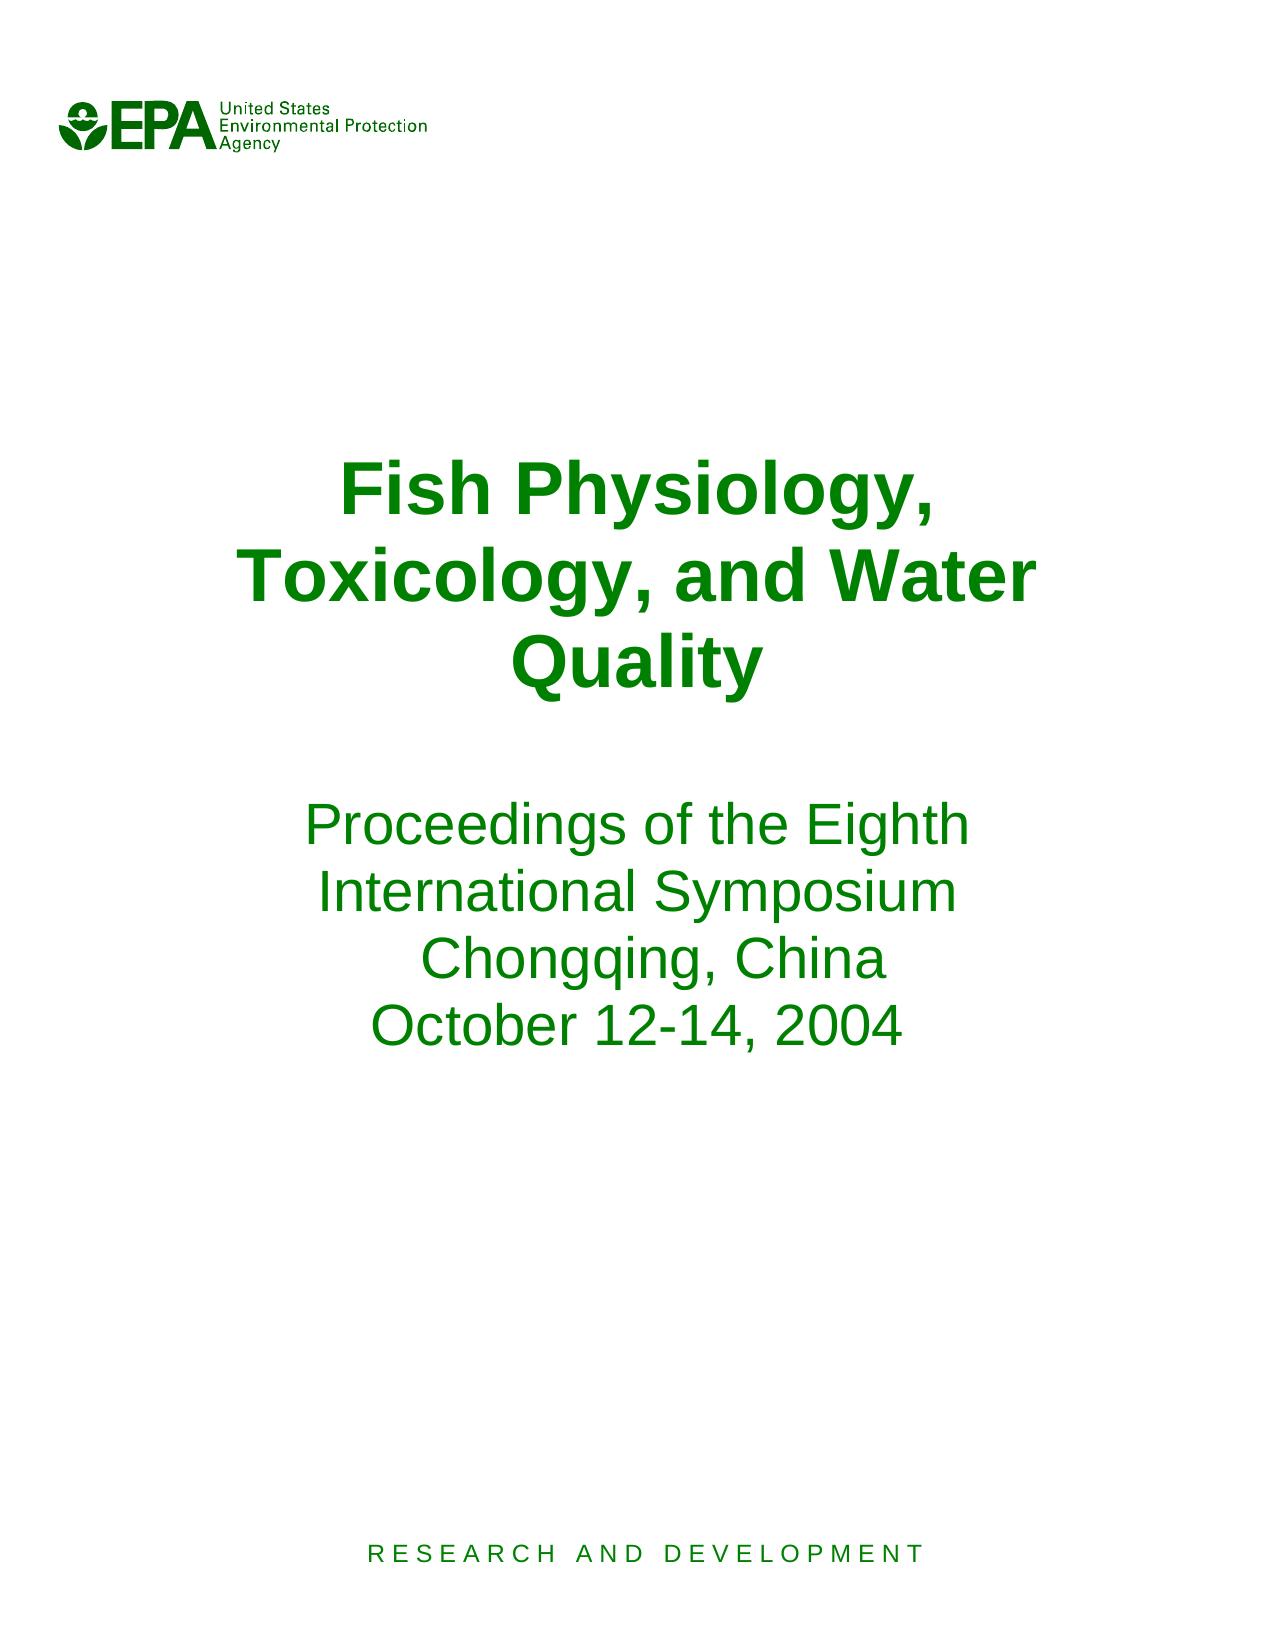 Fish Physiology, Toxicology, and Water Quality Proceedings of the Eighth International Symposium